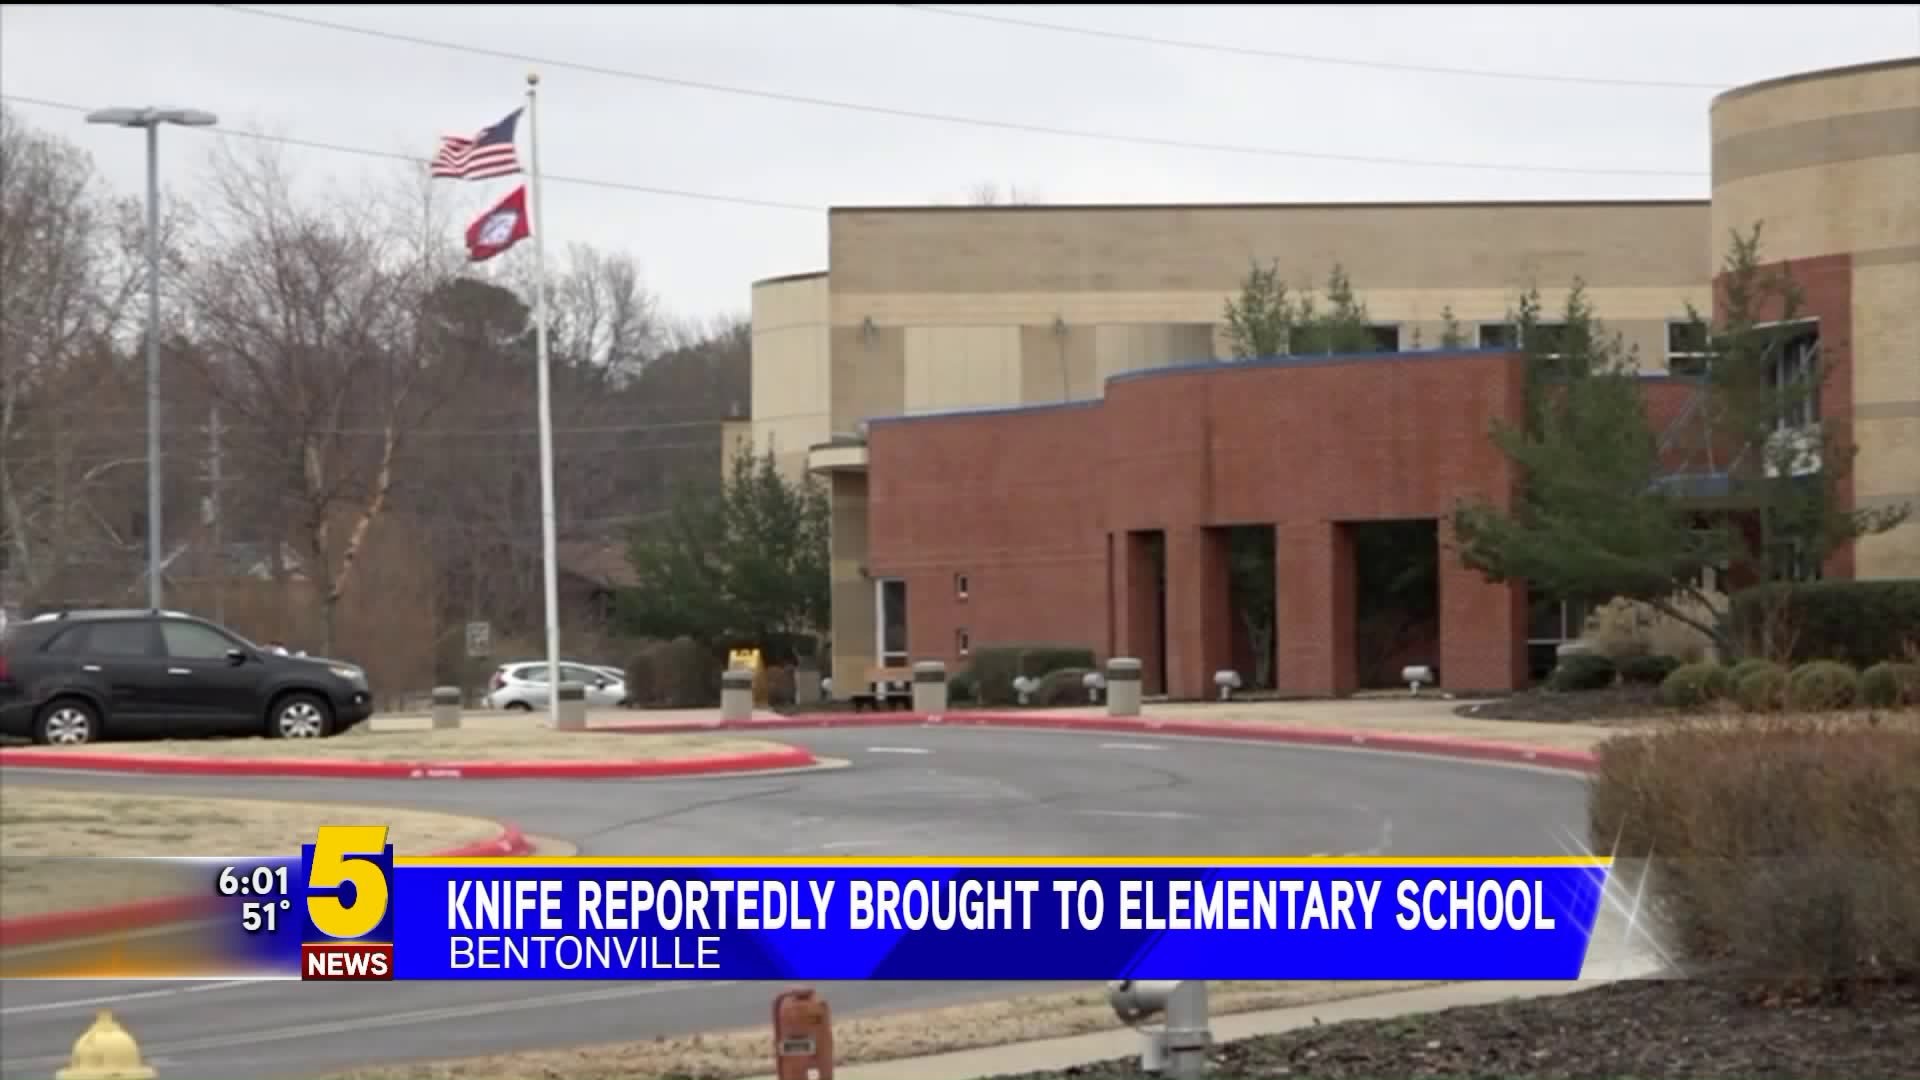 Student Brings Steak-Knife To Bentonville Elementary School To Harm Another Student